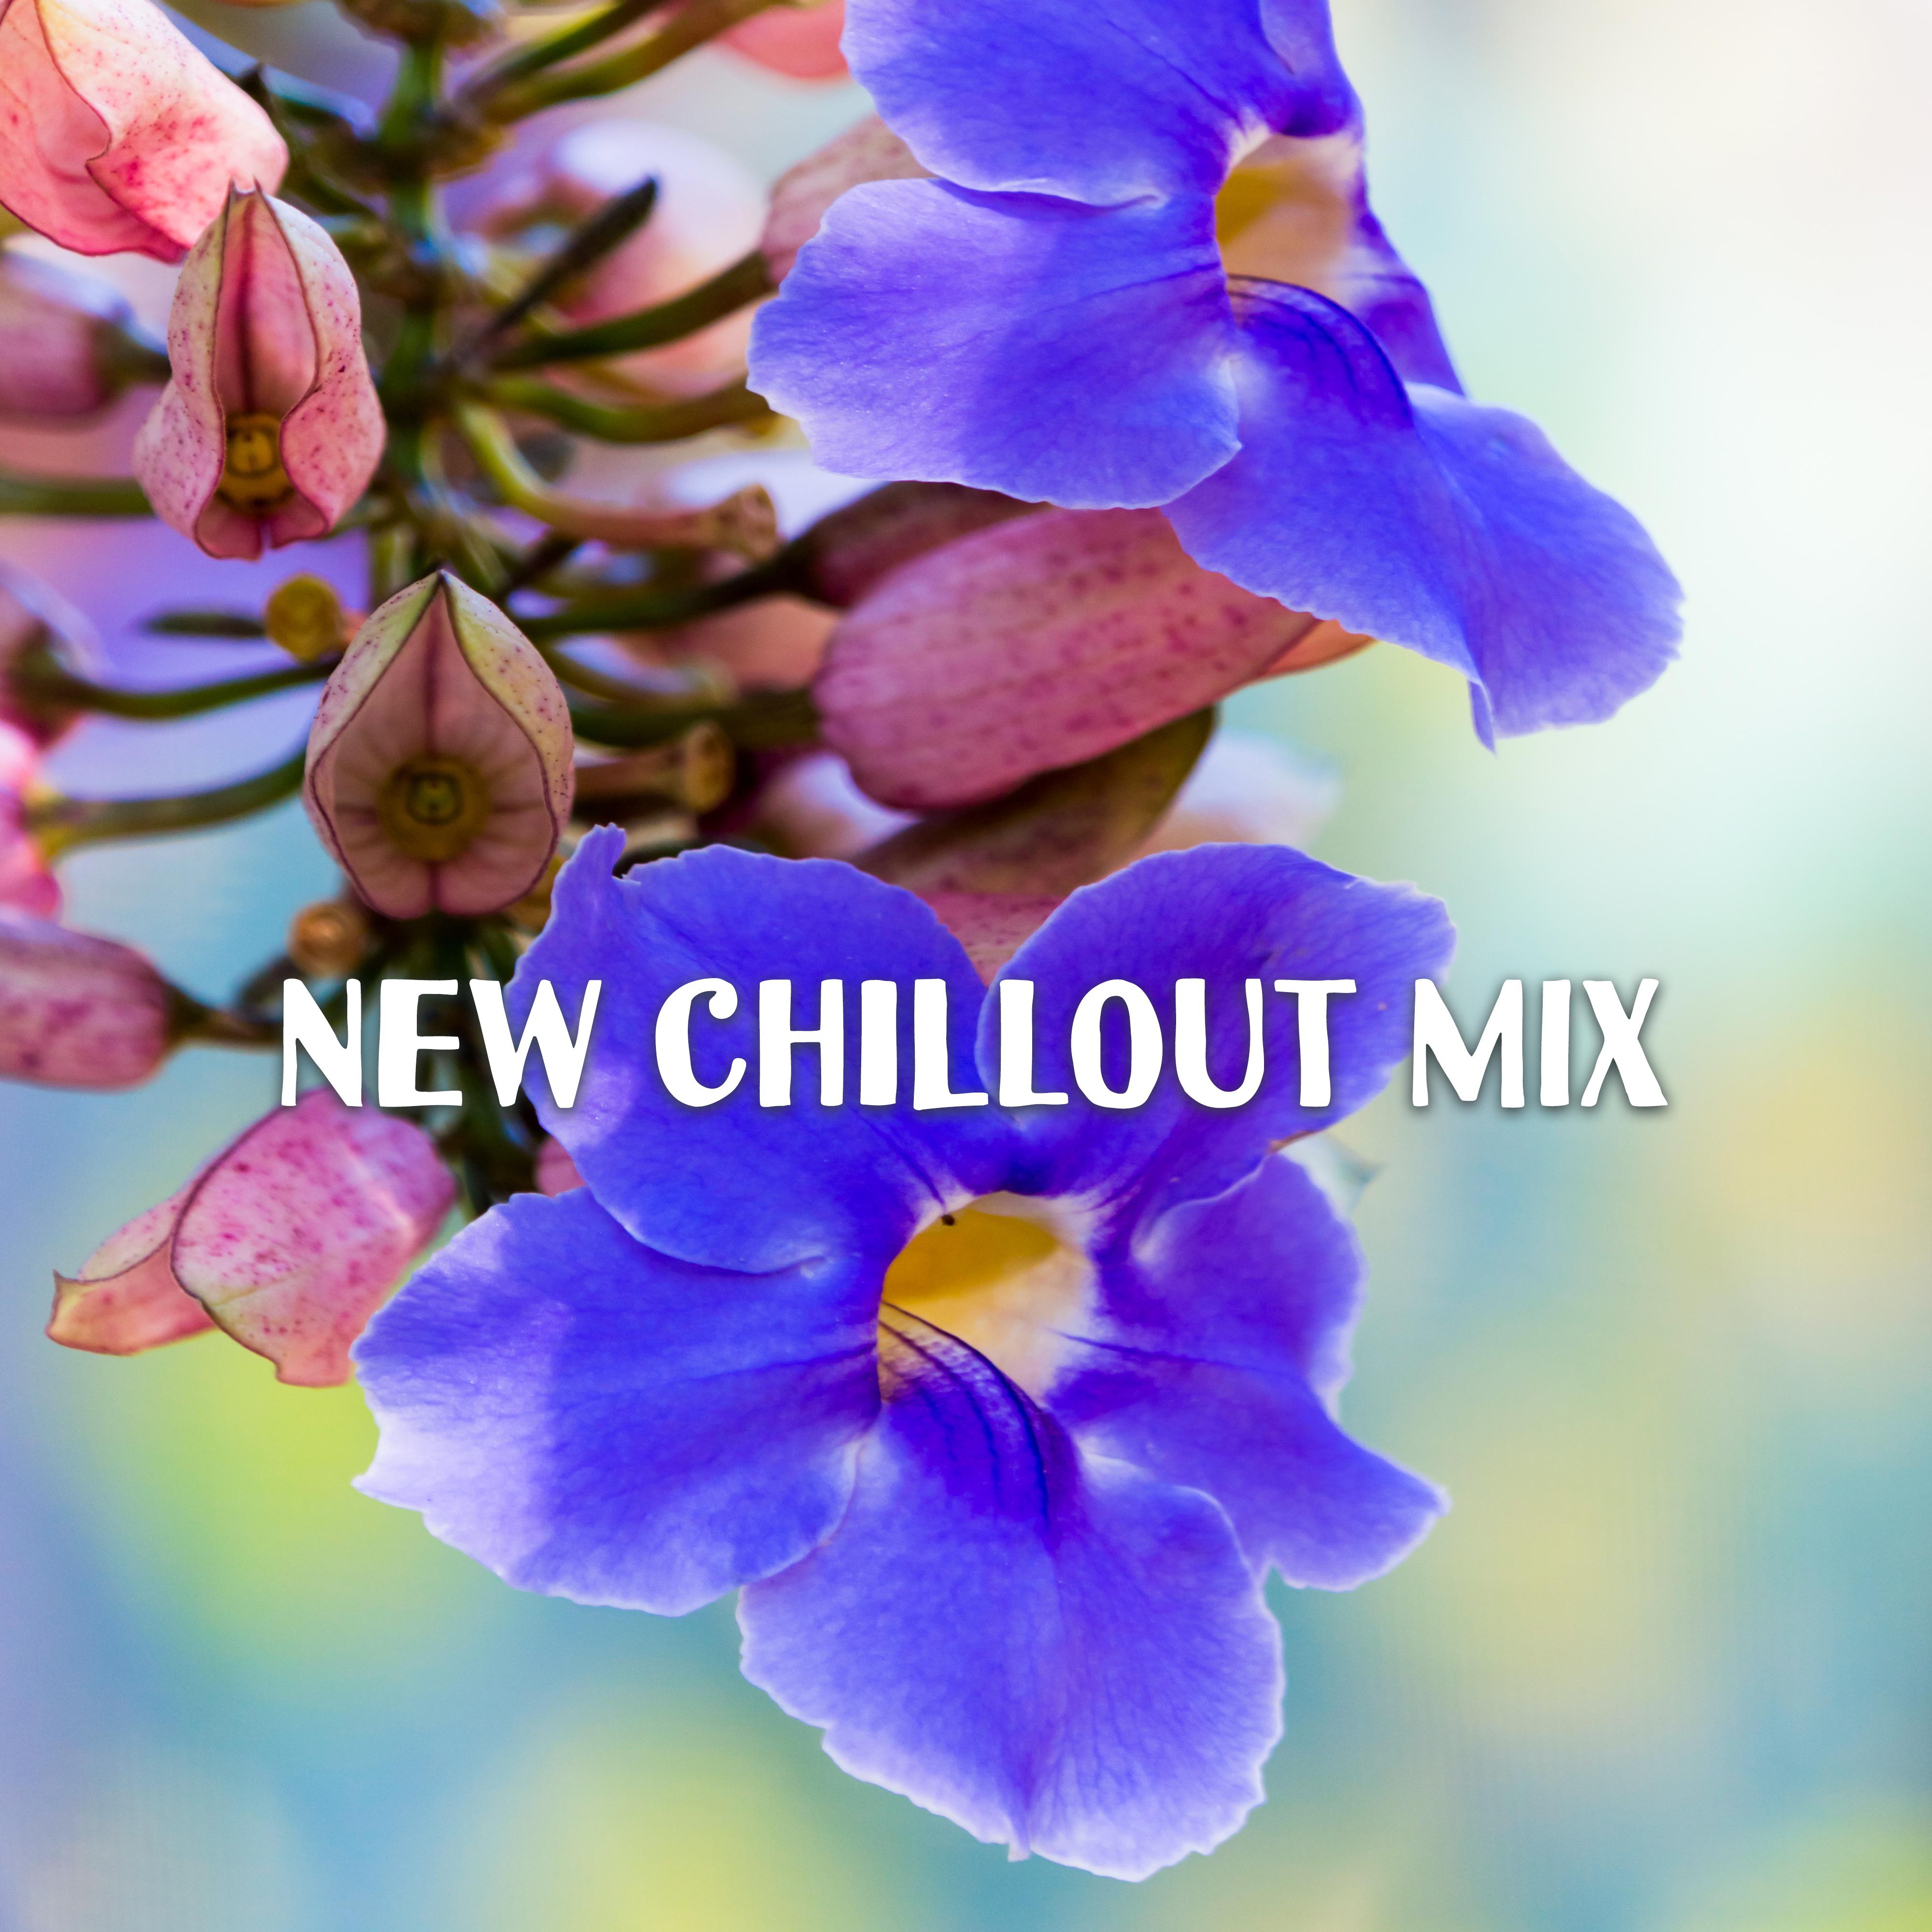 New Chillout Mix – Chillout Music , Deep Relaxation, Summertime Chill Out 2017, Party Hits Lounge